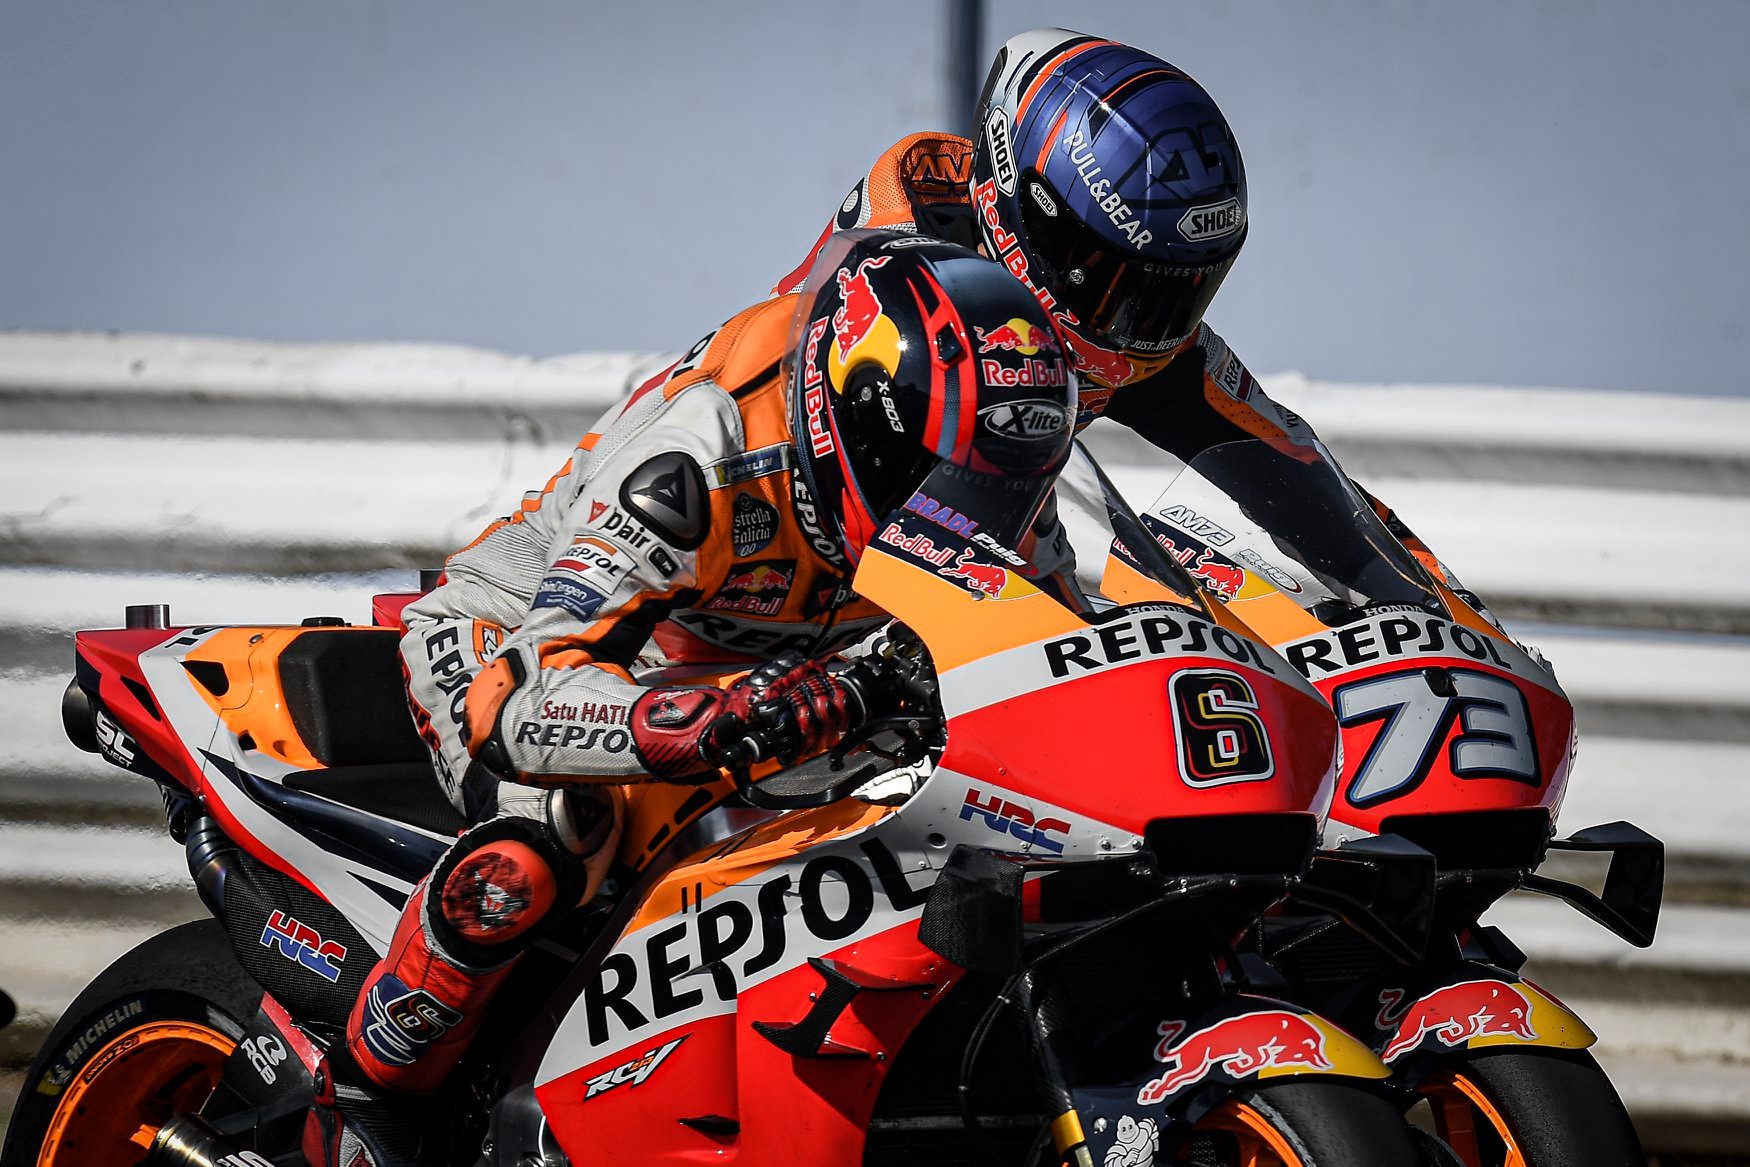 Honda team, collapse without M.Marquez